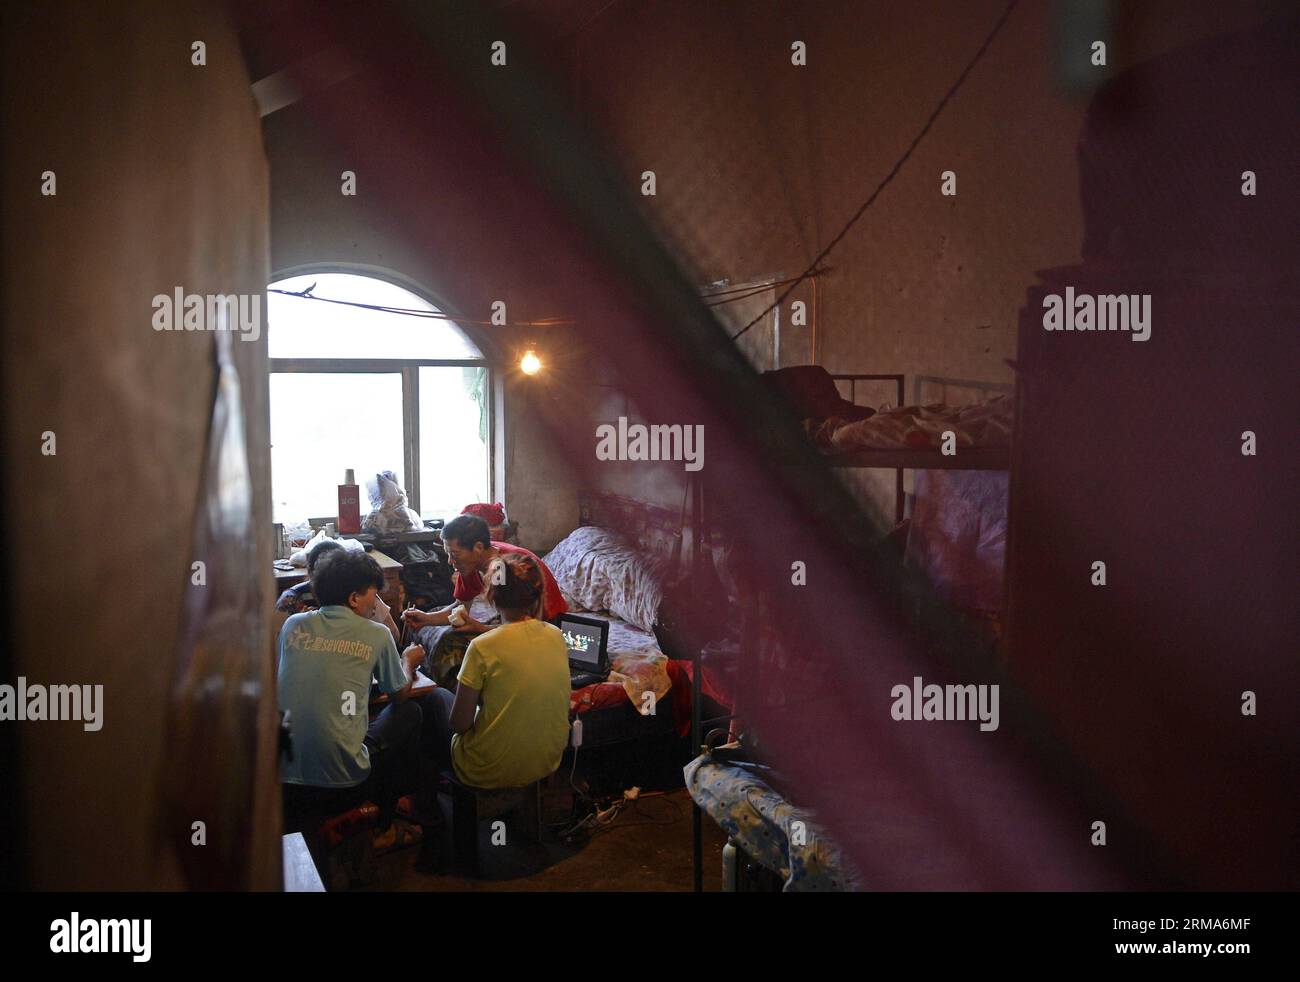 (140620) -- YINCHUAN, June 20, 2014 (Xinhua) -- A family has supper in the villa areas of Wulitai new village in Yinchuan, northwest China s Ningxia Hui Autonomous Region, June 10, 2014. There are over 30 villas in Wulitai new village with one third uncompleted due to the default of construction payments. Those villas are now rent out to migrant workers. A 200-square-meter villa was seperated into several rooms, and the rent of each one is about 300 yuan (about 48.18 U.S.dollars). For migrant workers who have no access to cheap bungalows or can t afford apartments, such room is a good residenc Stock Photo